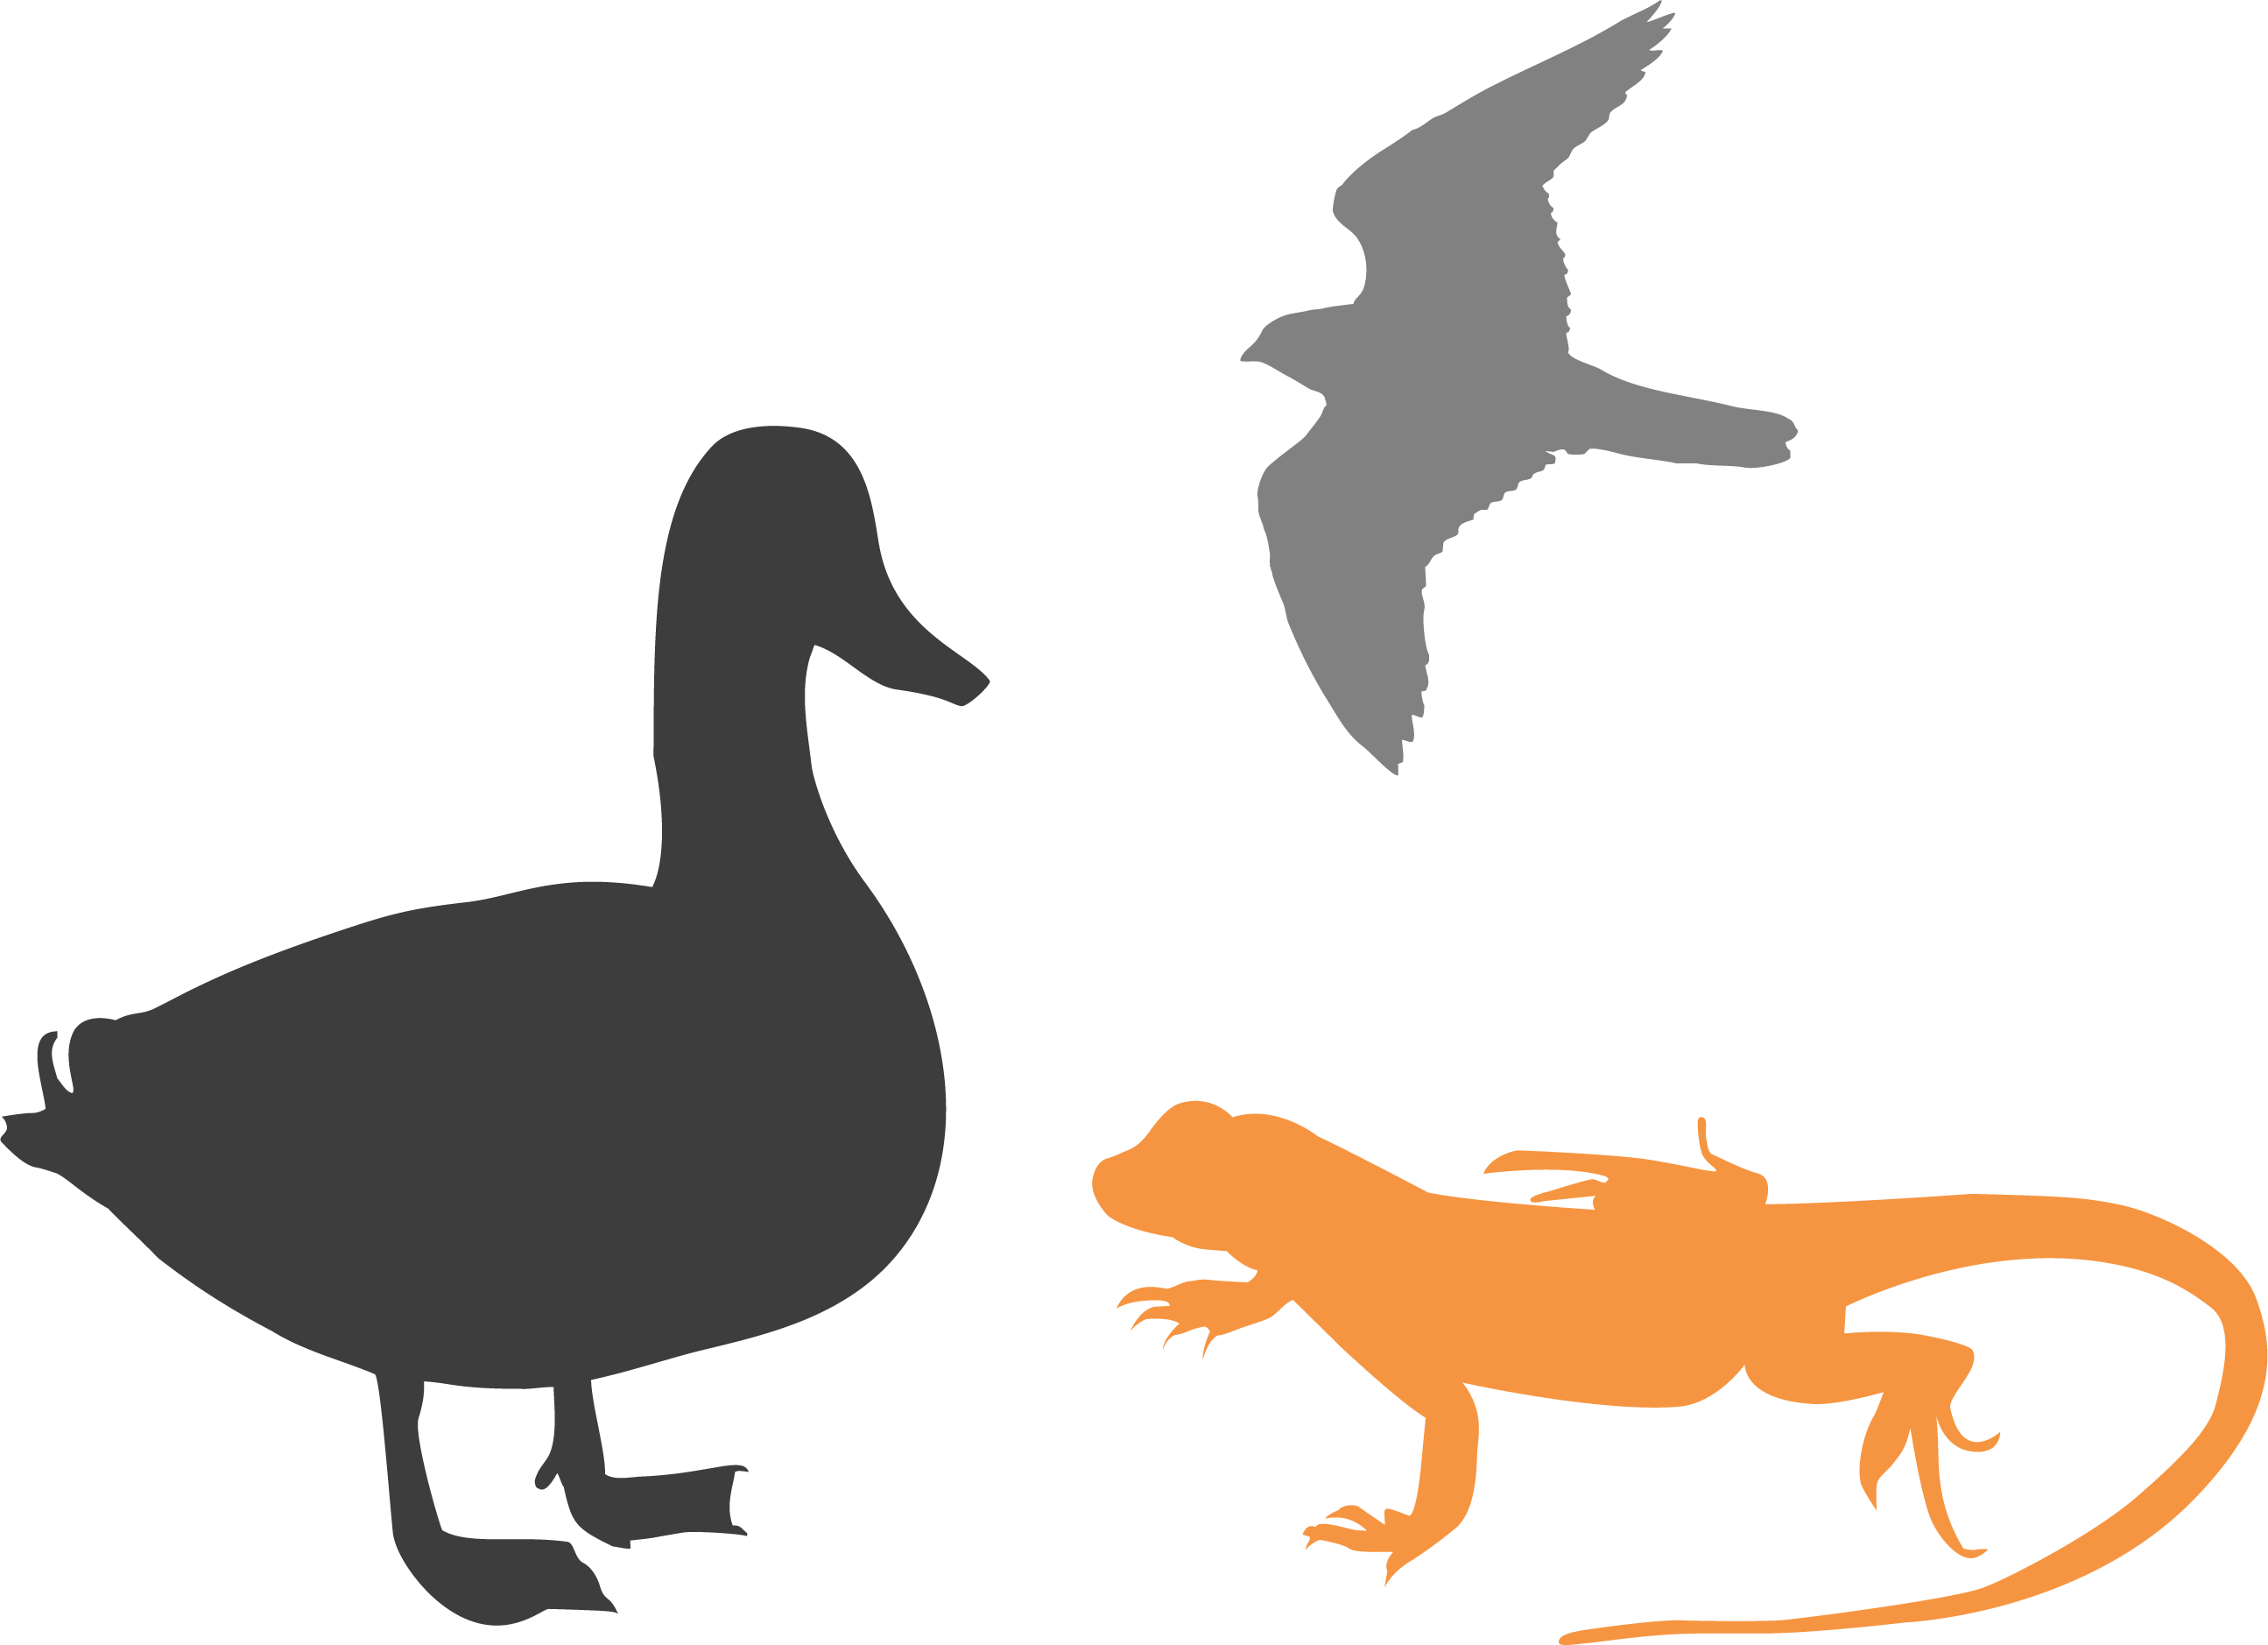 Silhouettes of a duck, lizard, and flying bird